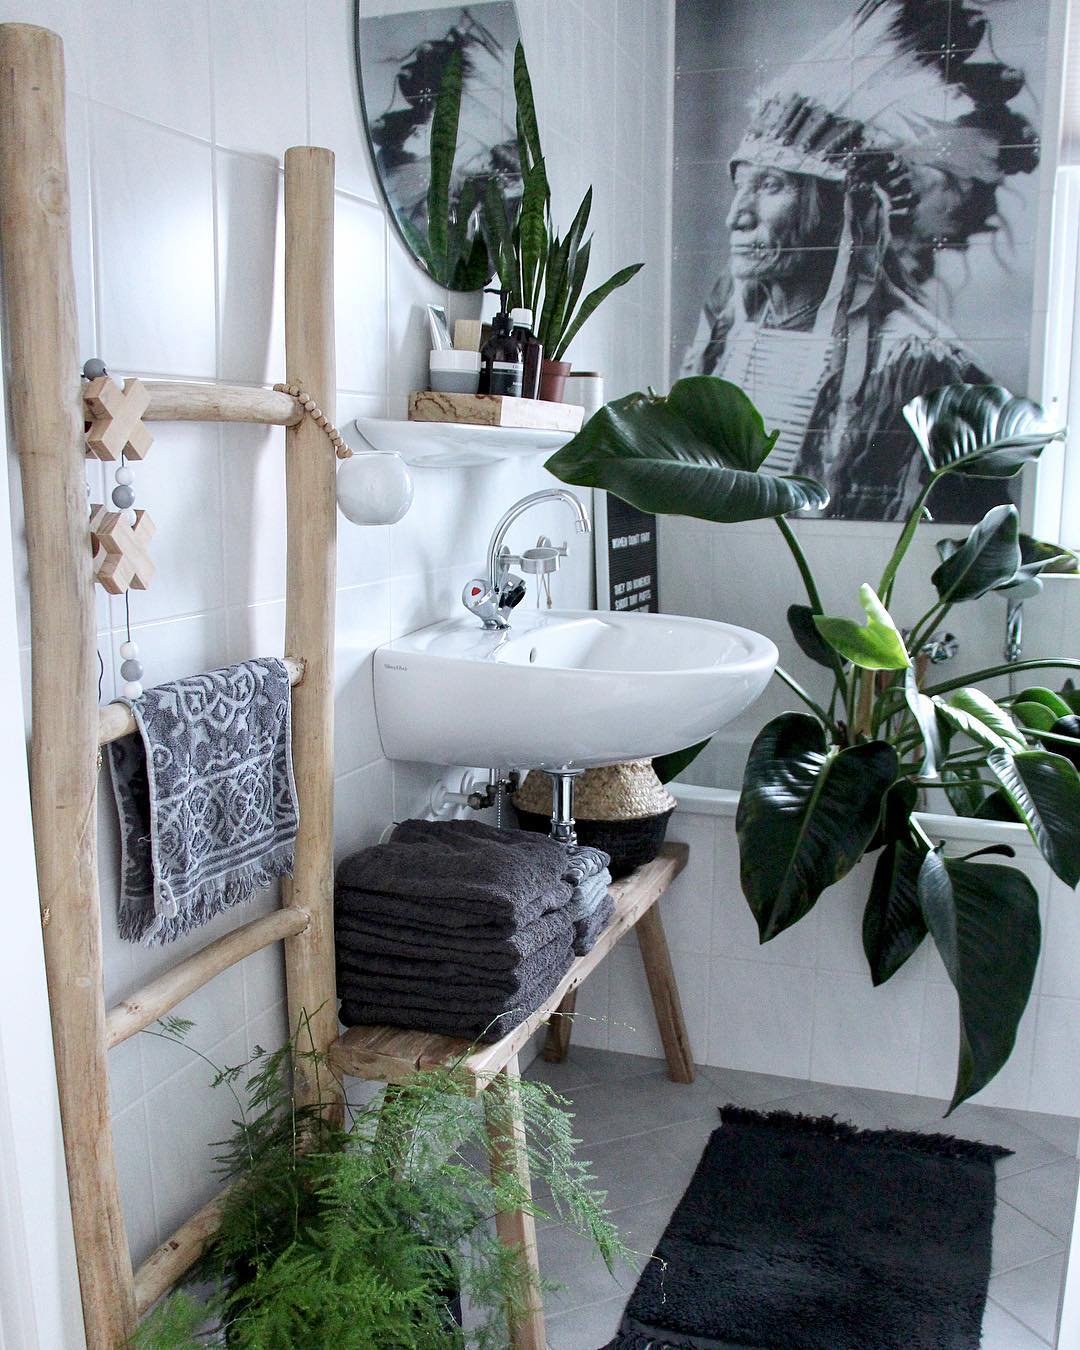 16 Under-the-Sink Bathroom Storage Ideas to Keep Your Space